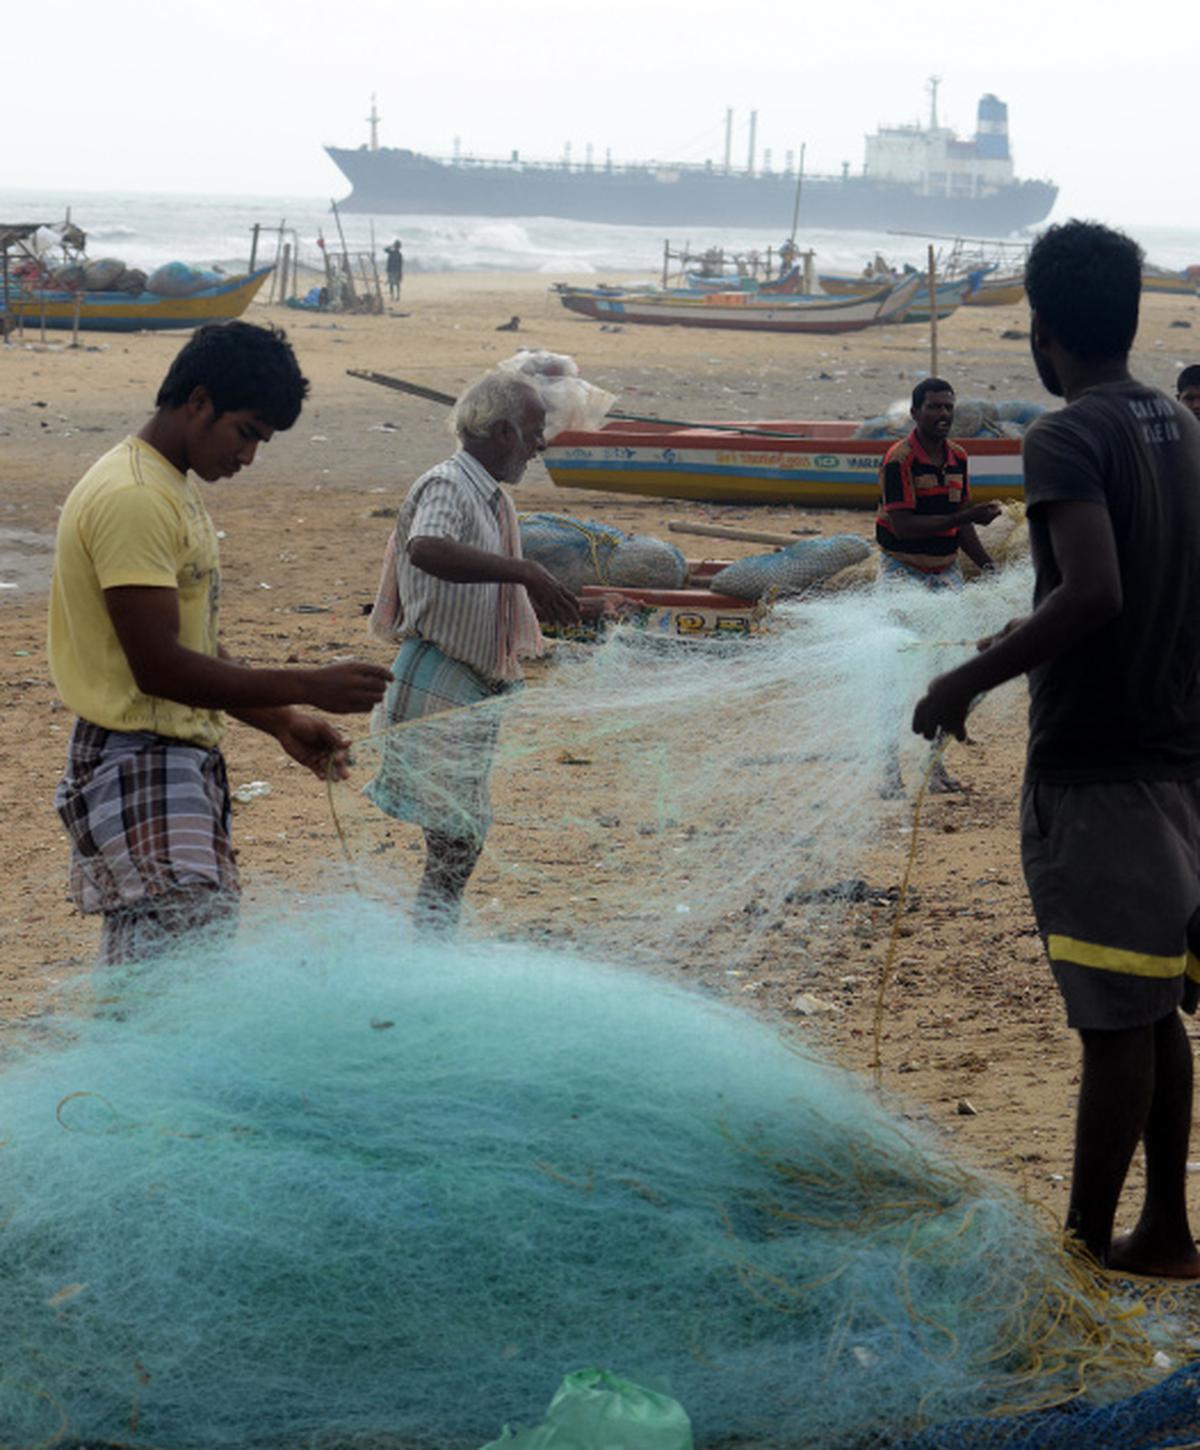 Damage to nets costs fishermen their earnings - The Hindu